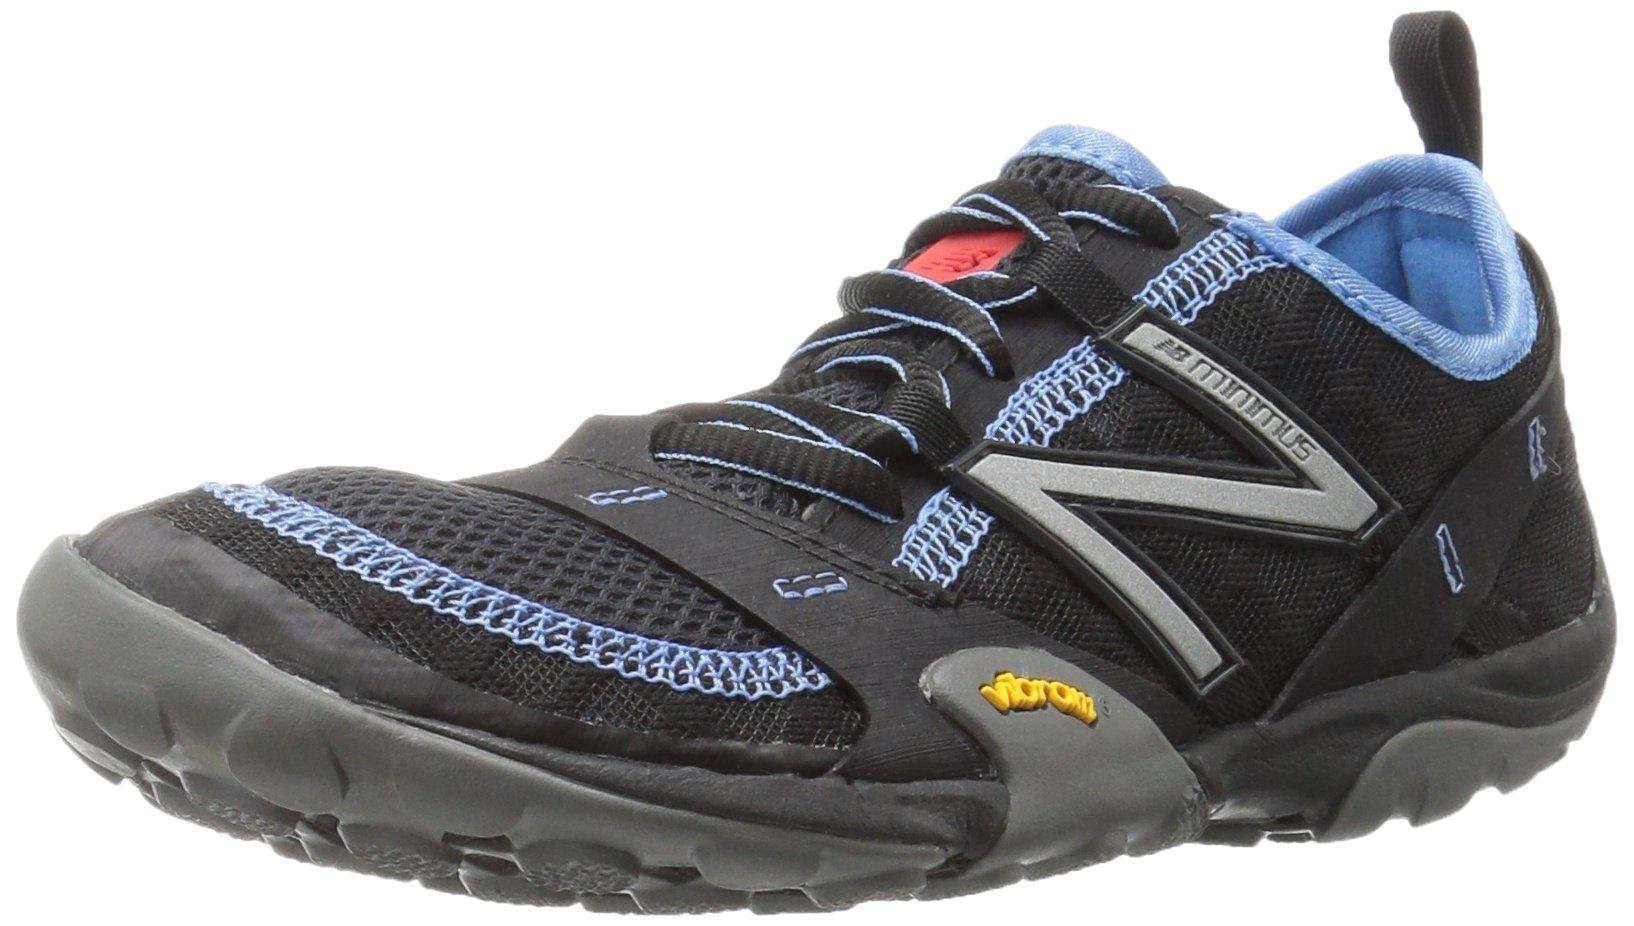 New Balance S Minimus Wt10v1 Trail Running Shoes in Black | Lyst